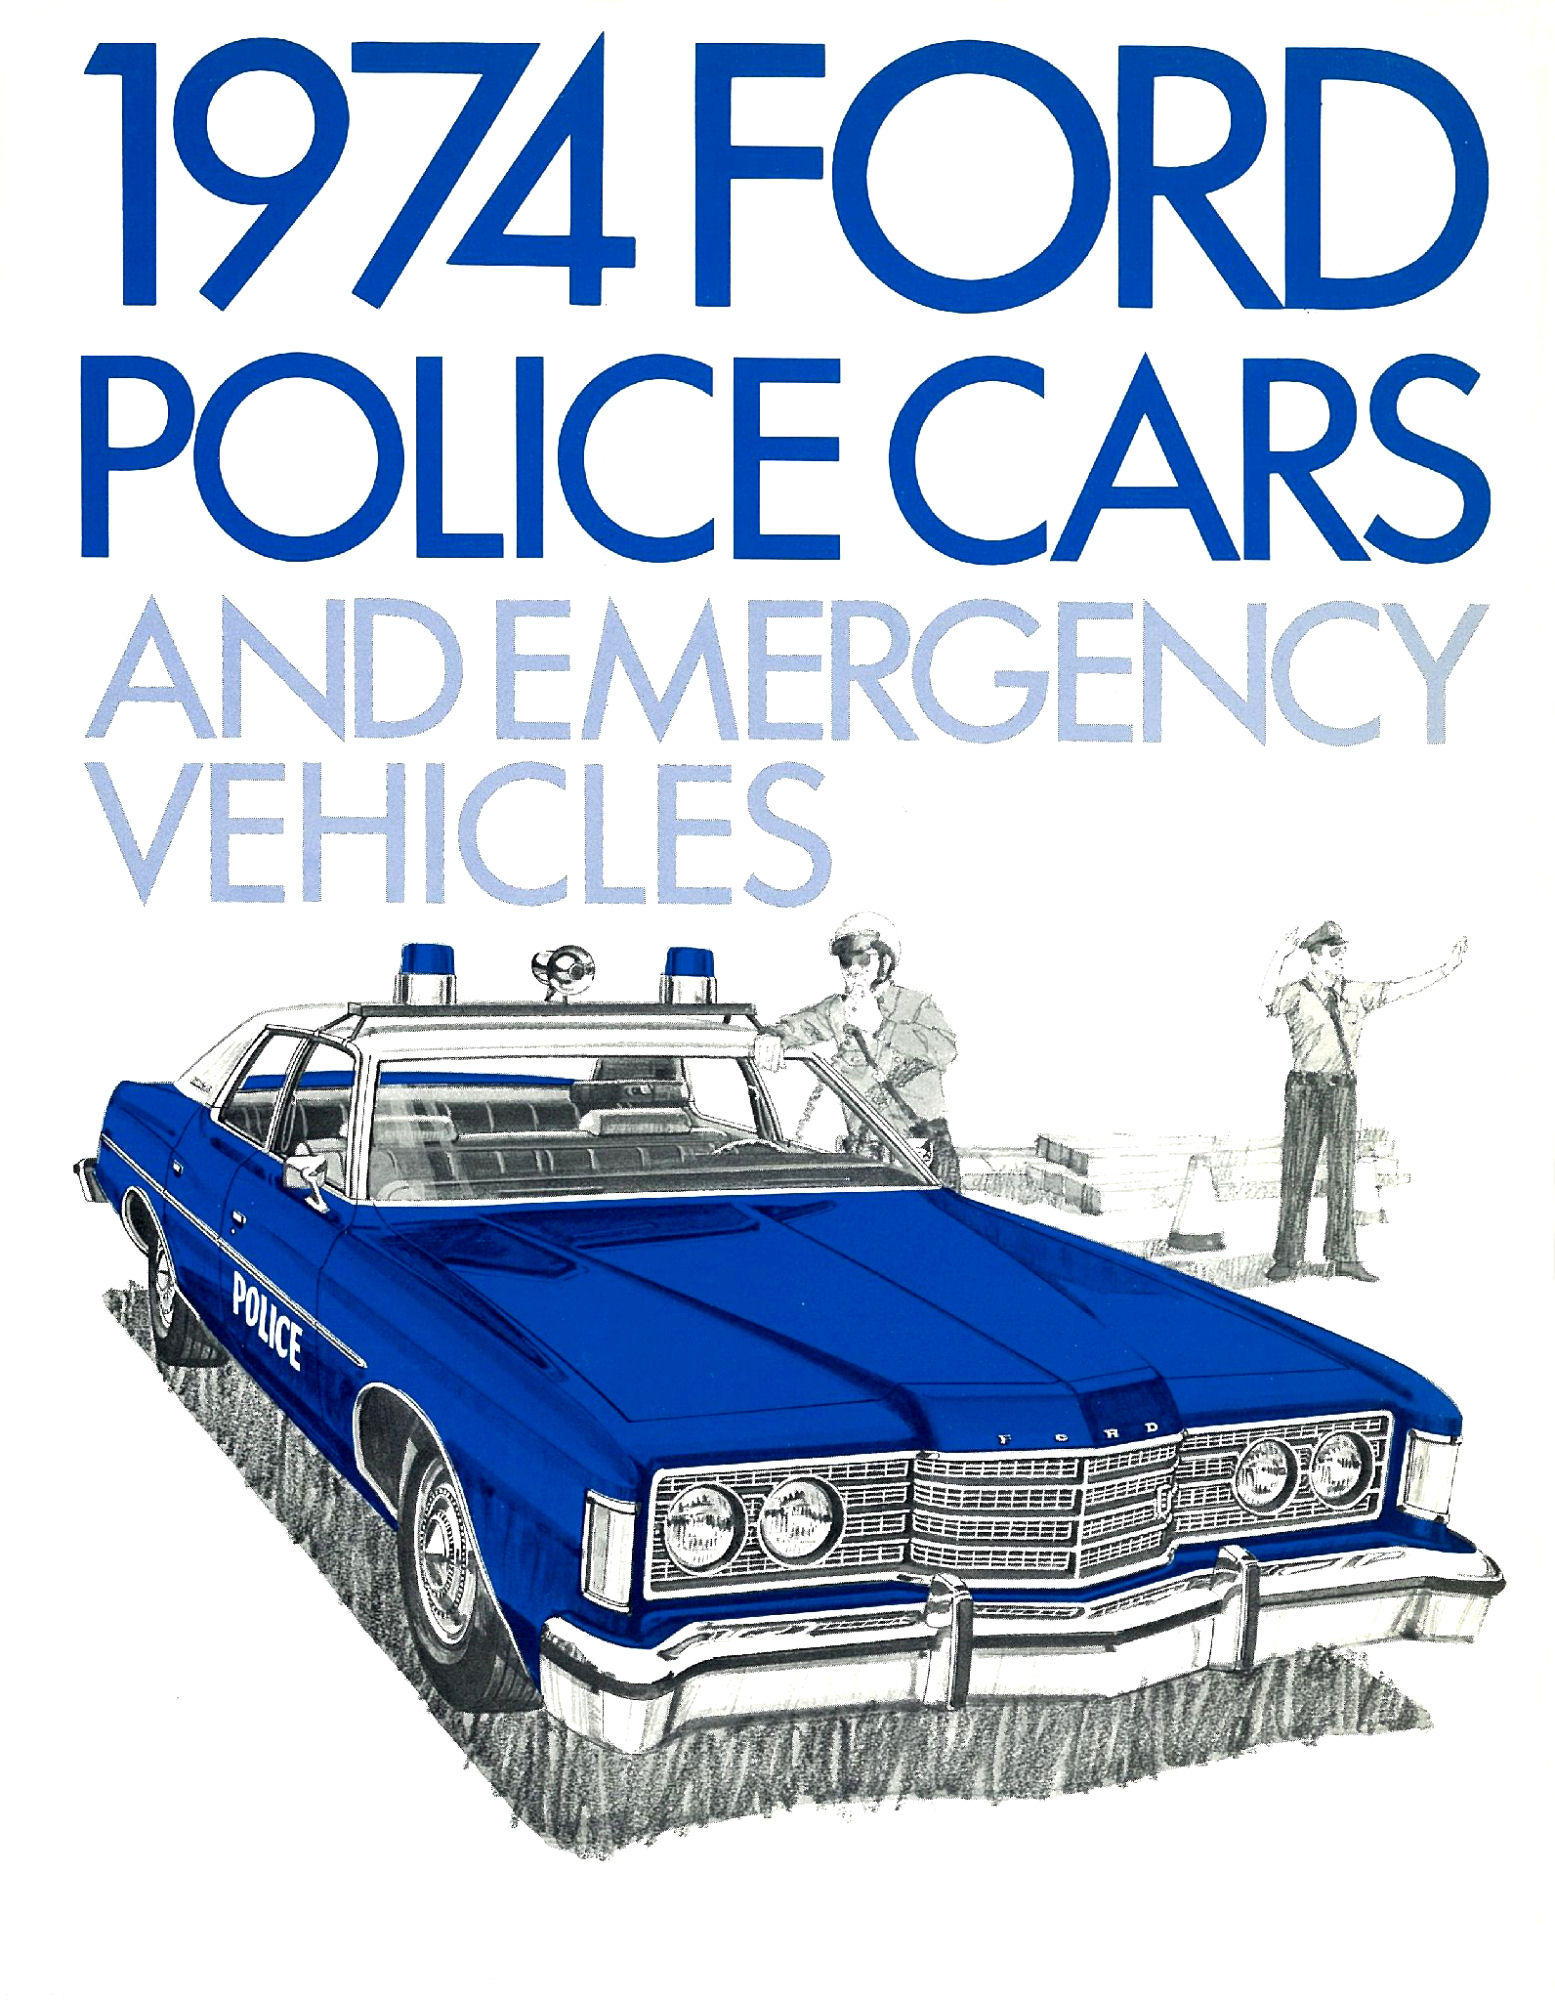 1974 Ford Police Cars-01